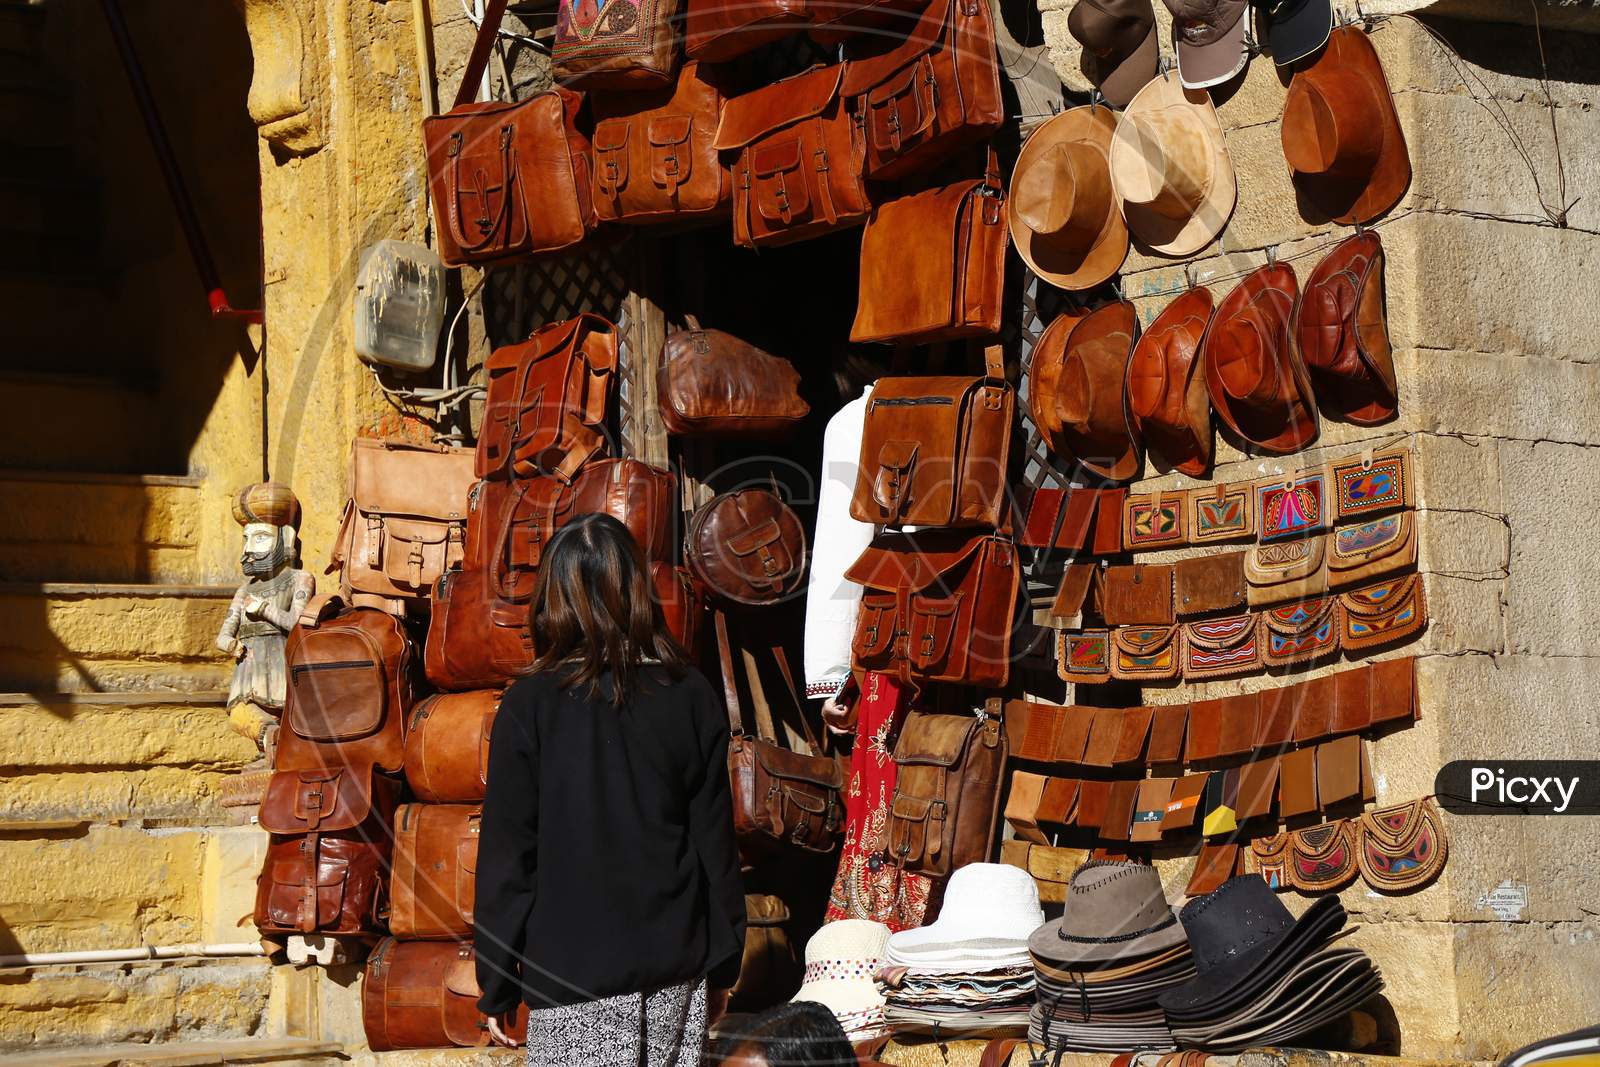 Vendor Stalls With Hats And Caps At Jaisalmer Desert Festival, Rajasthan, India